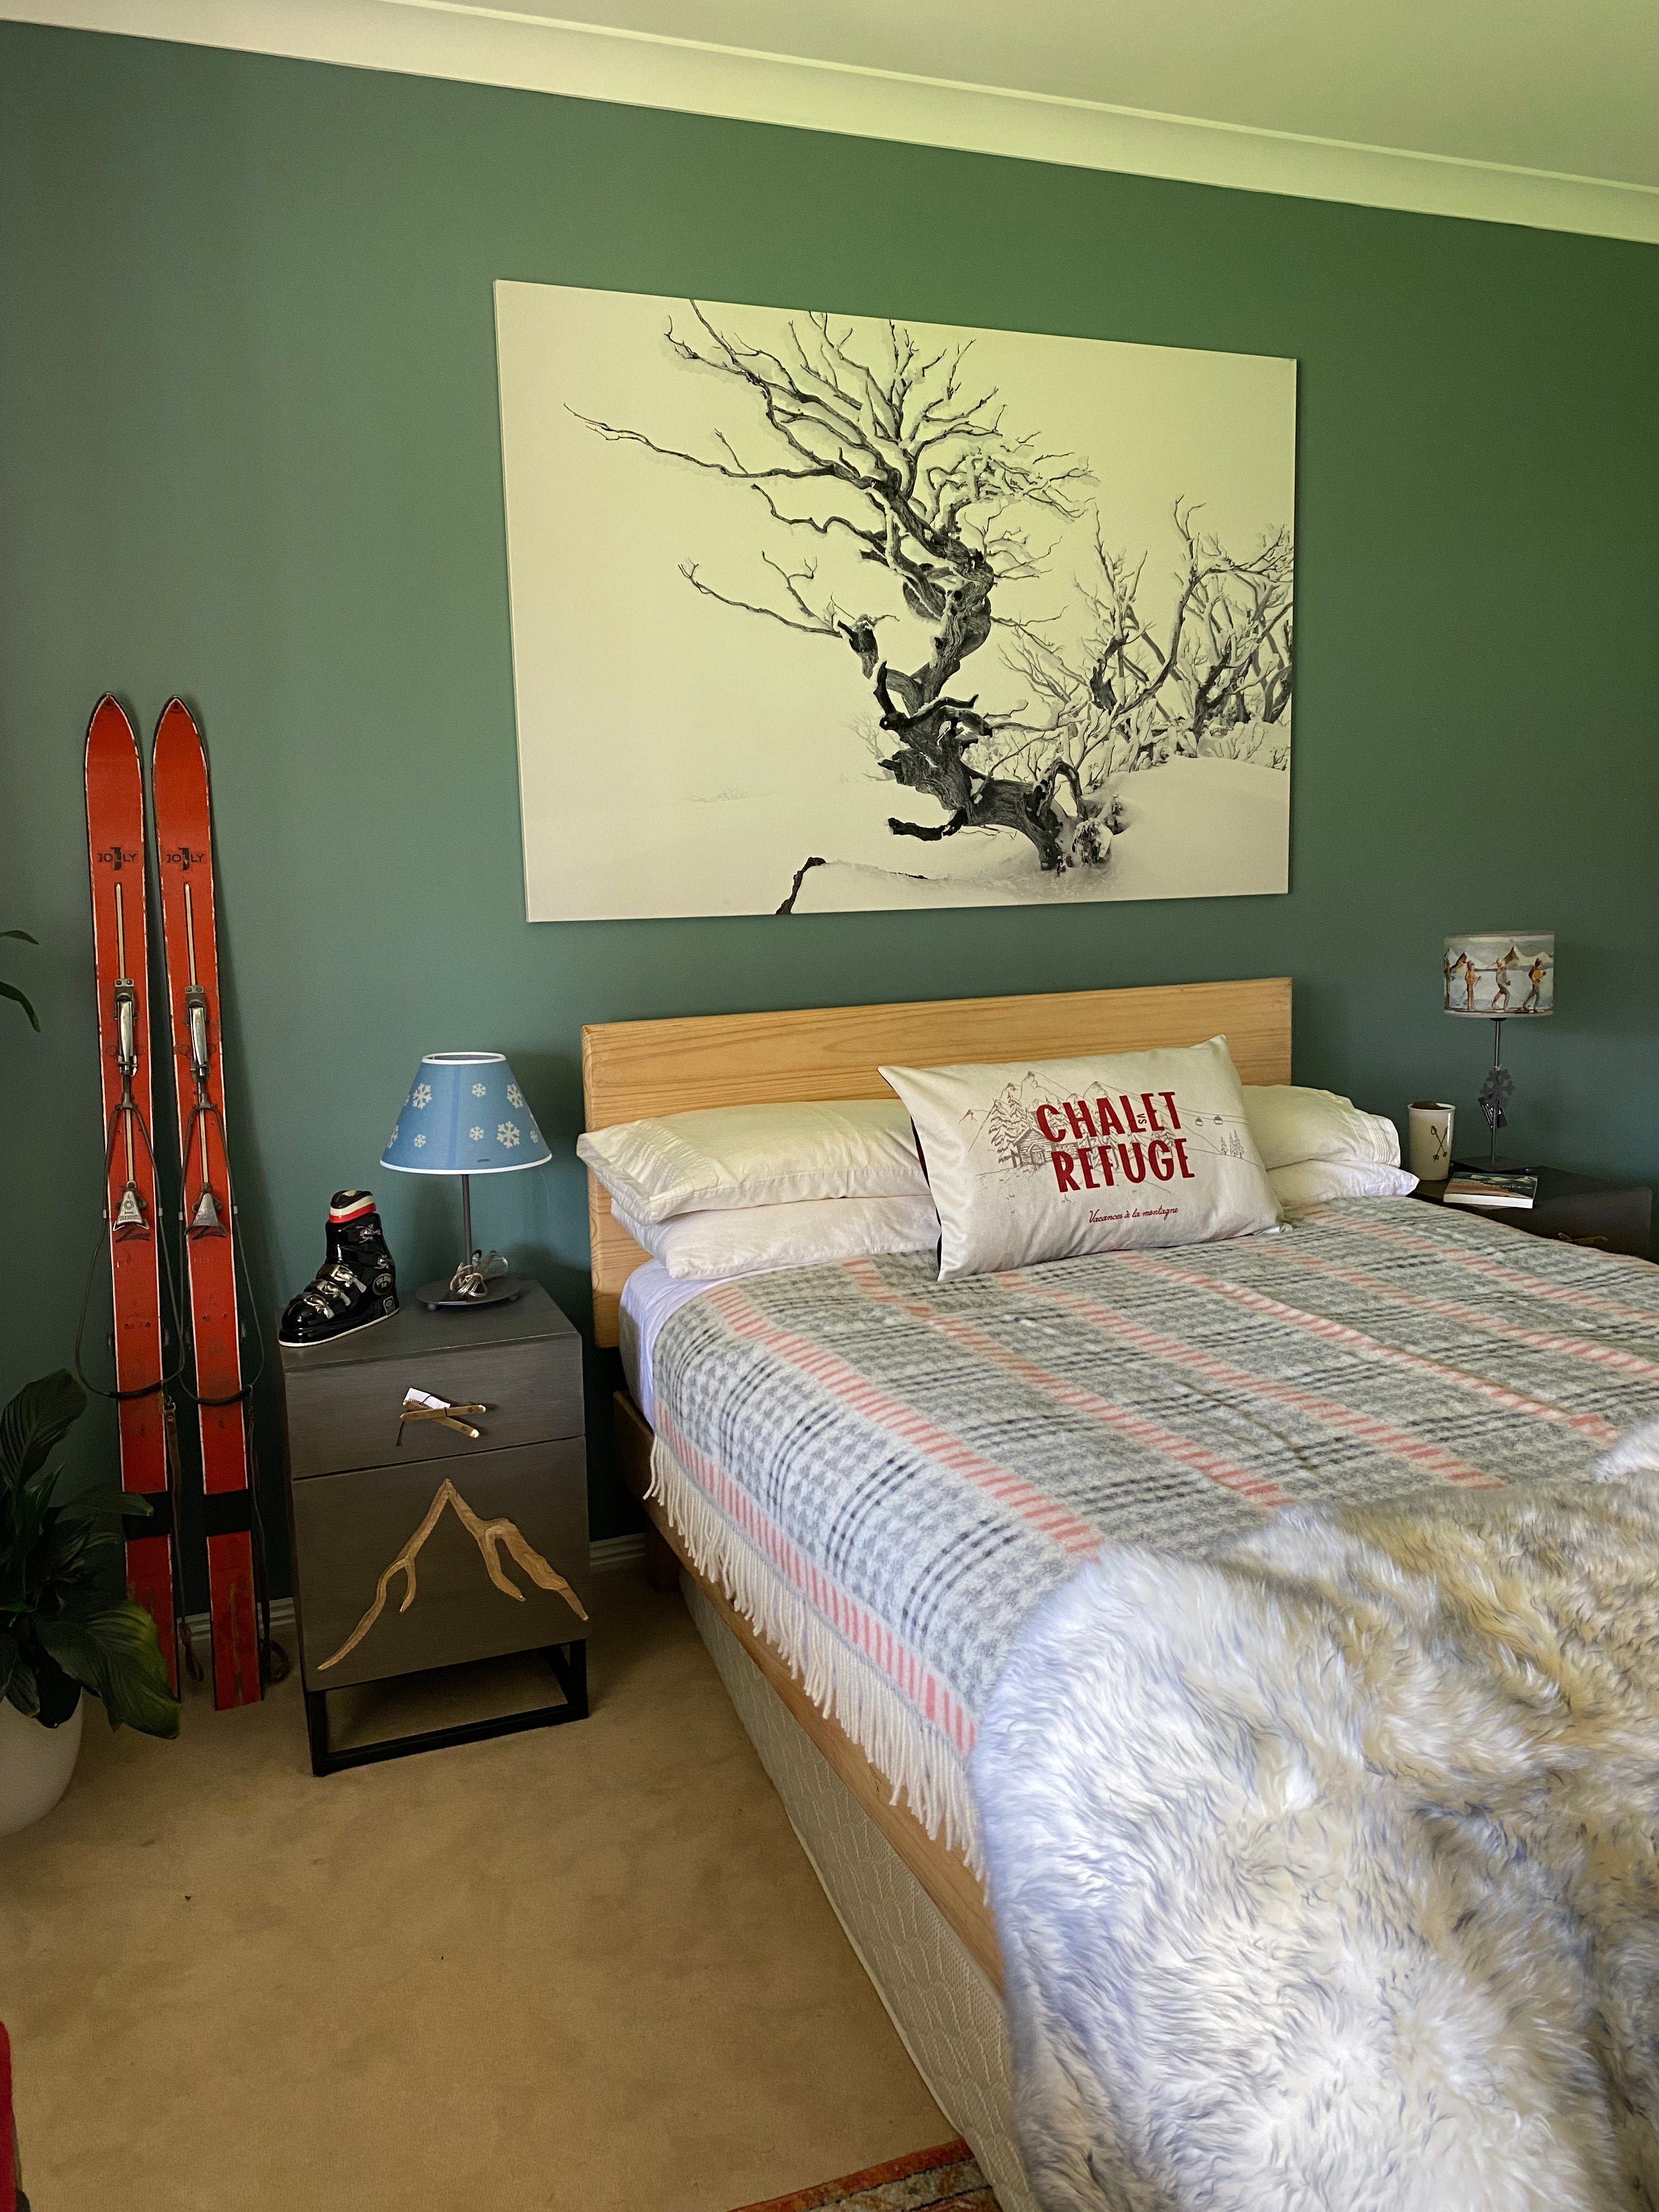 Wide angle view of a guest bedroom, with the Blue Snowflake lamp on the left hand bedside table. Room painted green, with vintage orange skis leaning against the wall. Grey, red & white blanket on the double bed and one throw cushion and a grey tipped white long-hair sheepskin rug.